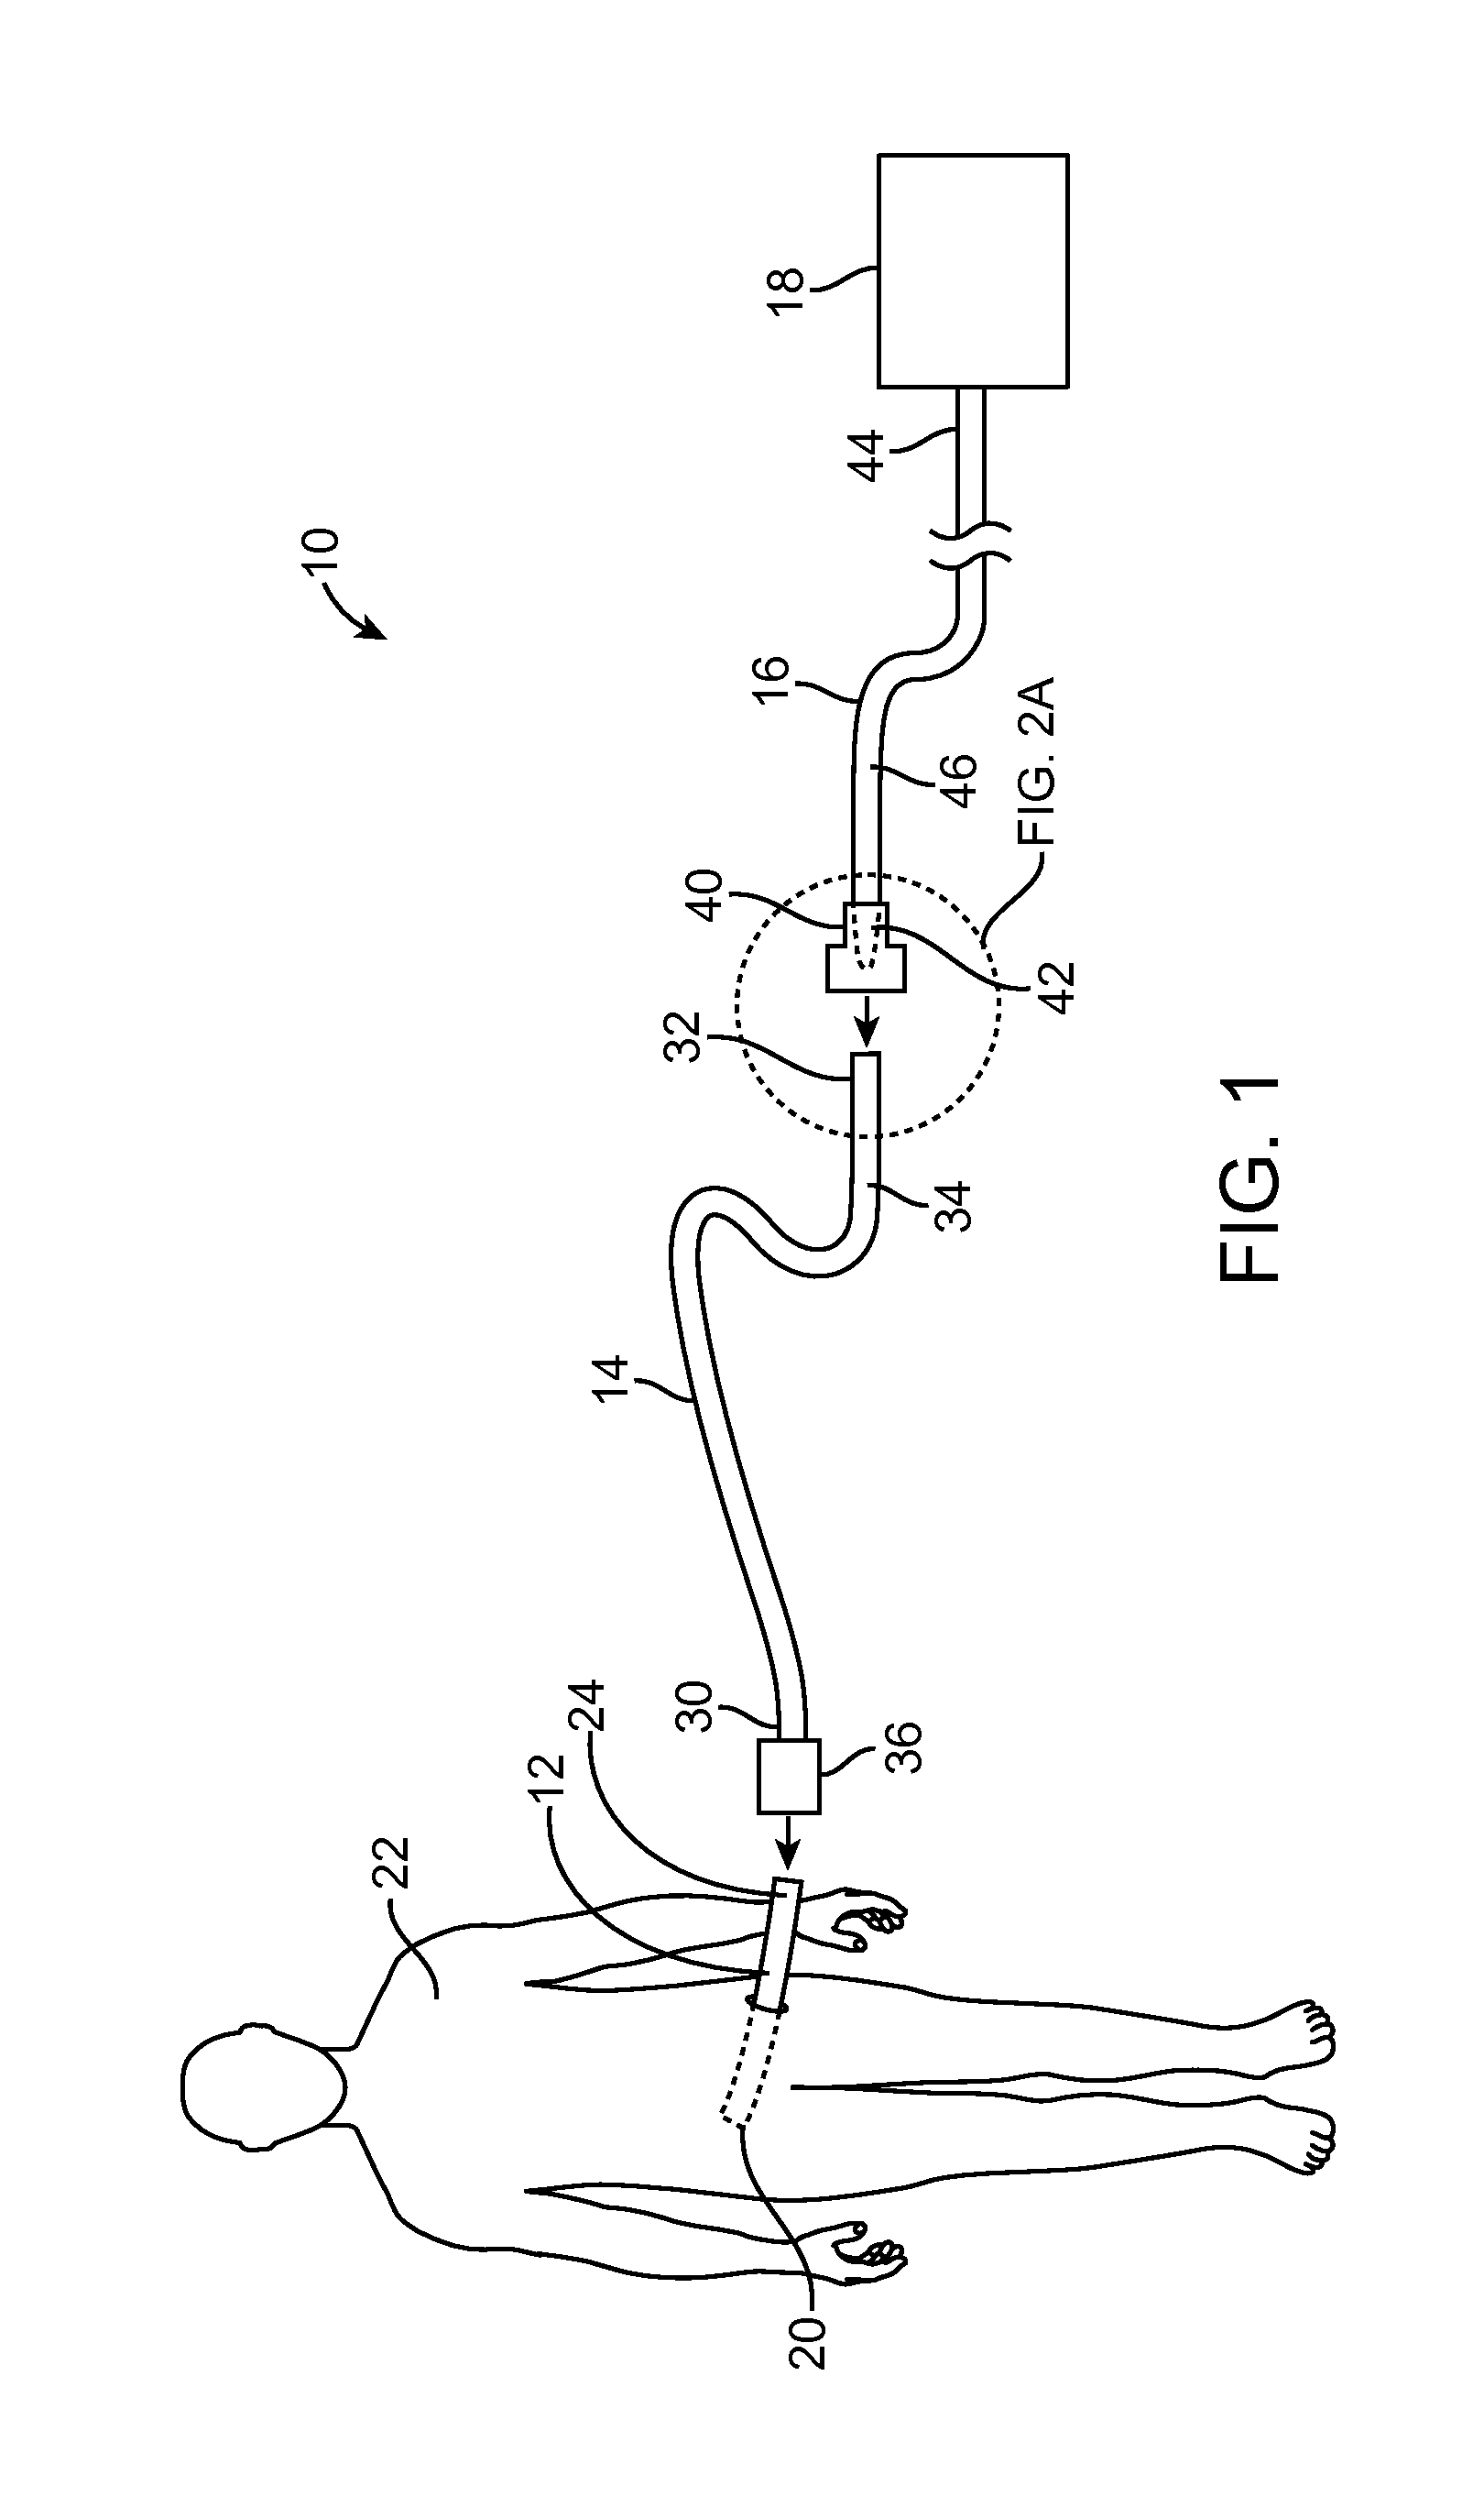 Systems and methods for increasing sterilization during peritoneal dialysis